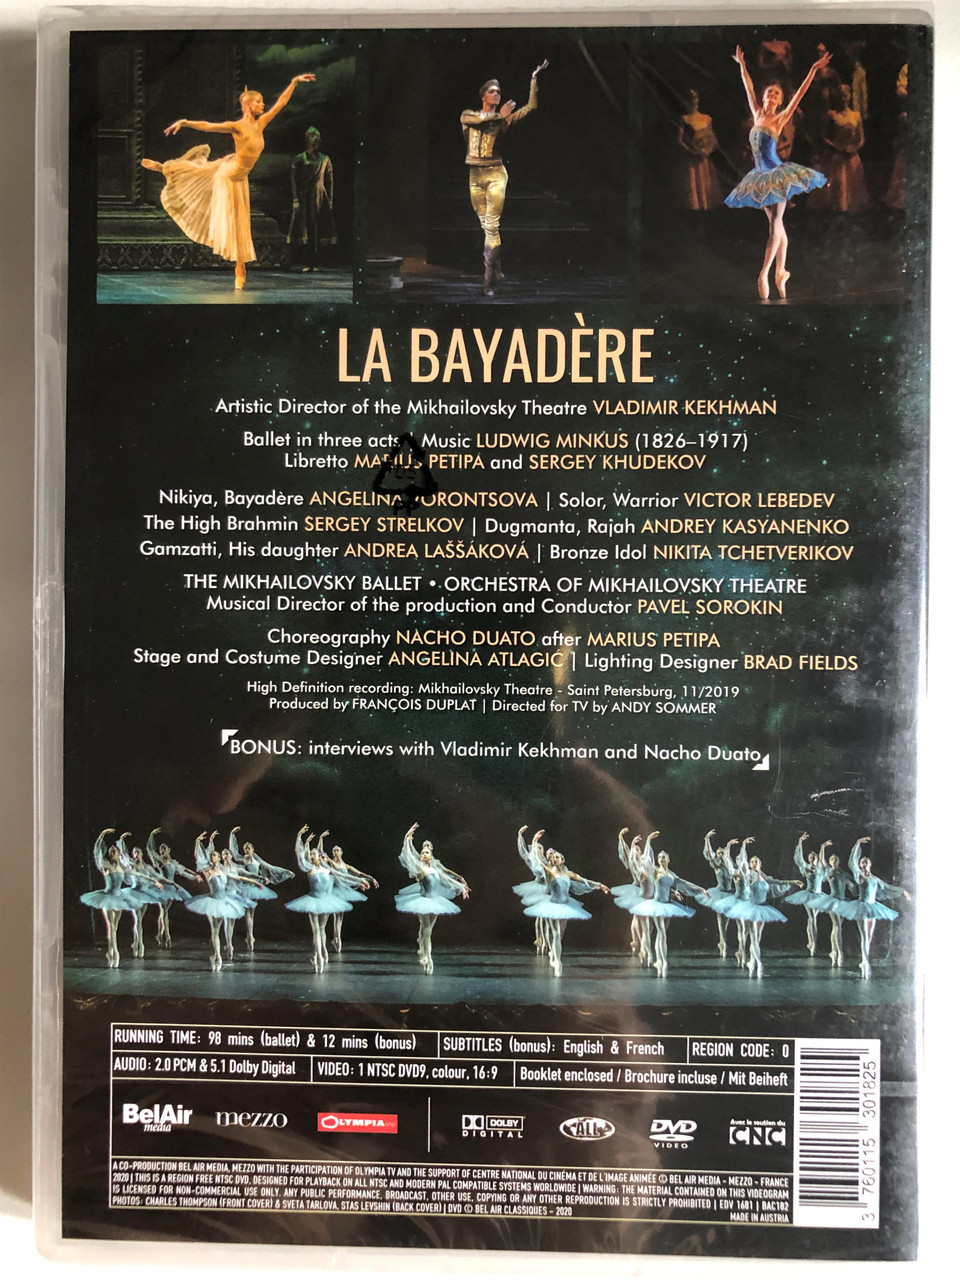 MINKUS_Bayadere_Ballet_in_three_acts_Libretto_THE_MOUSE_PETIPA_and_SERGY_KHUDEKOV_THE_MIKHAILOVSKY_BALLET.ORCHESTRA_OF_MIKHAILOVSKY_THEATRE_Conductor_PAVEL_SOROKIN_DVD_3__09818.1691723678.1280.1280.JPG (960×1280)